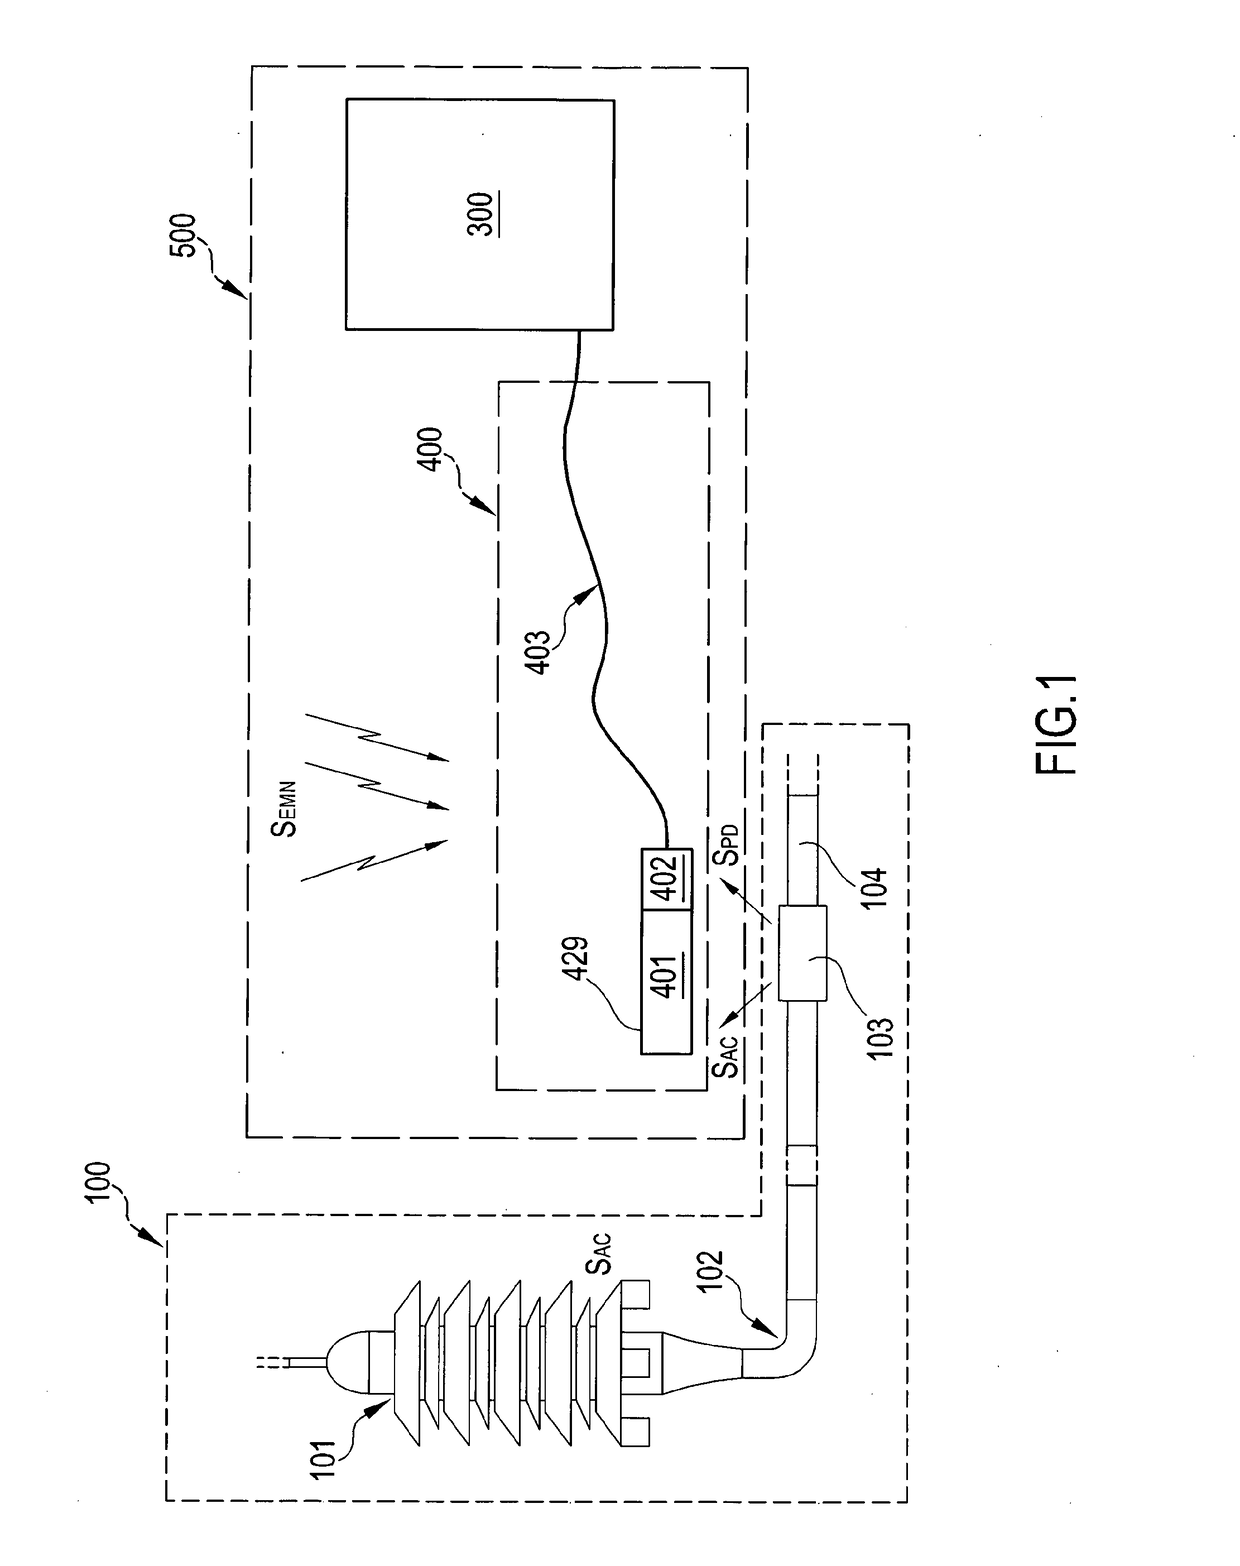 Partial discharge acquisition system comprising a capacitive coupling electric field sensor